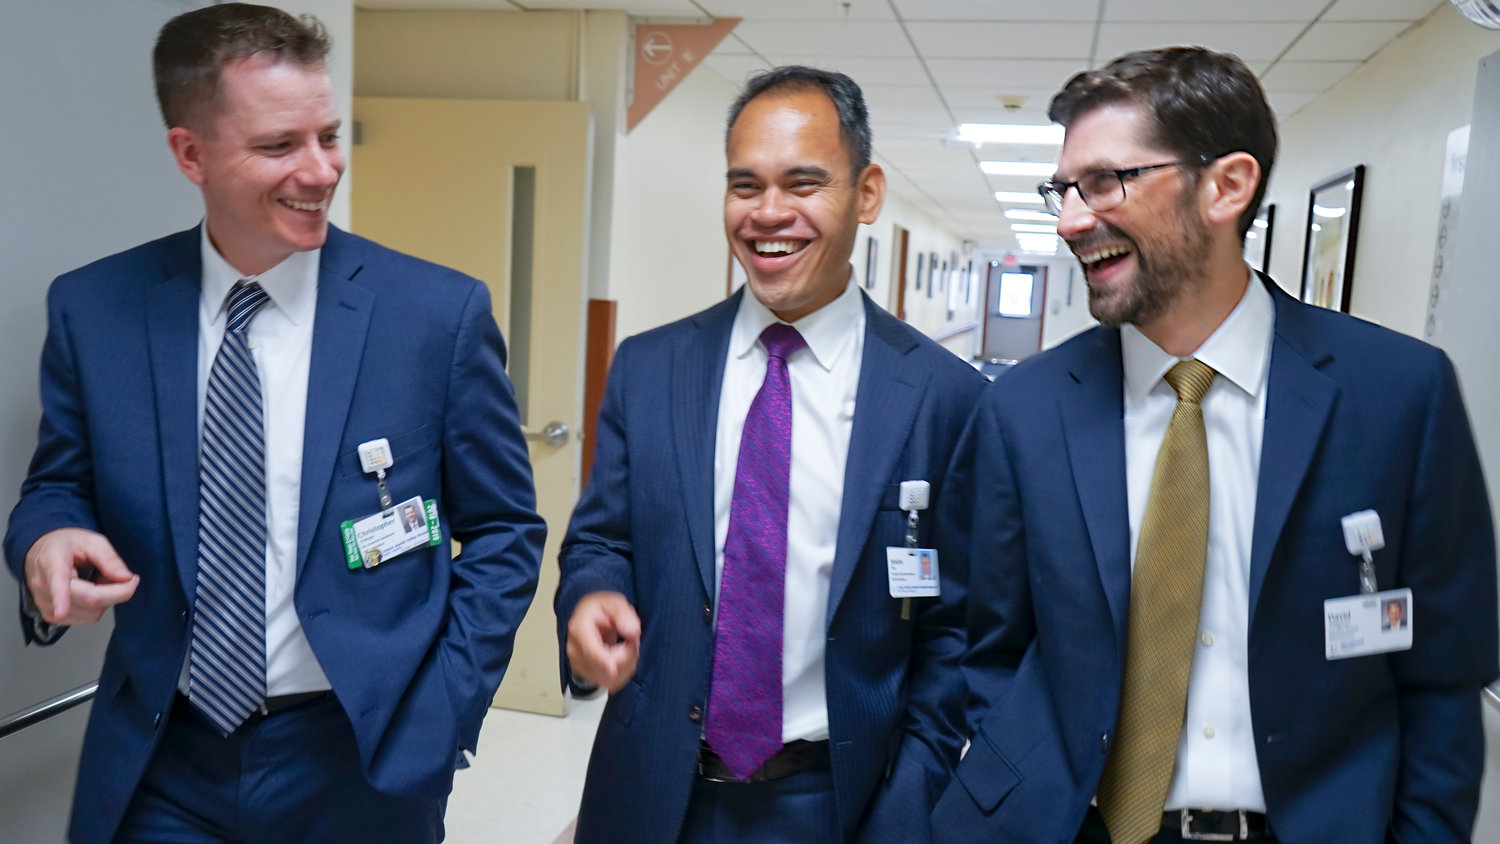 Seligman, far right, with Chris O’Brien, far left, senior director of financial operations at LIJ Valley Stream, and Jason Tan, deputy executive director of administration.